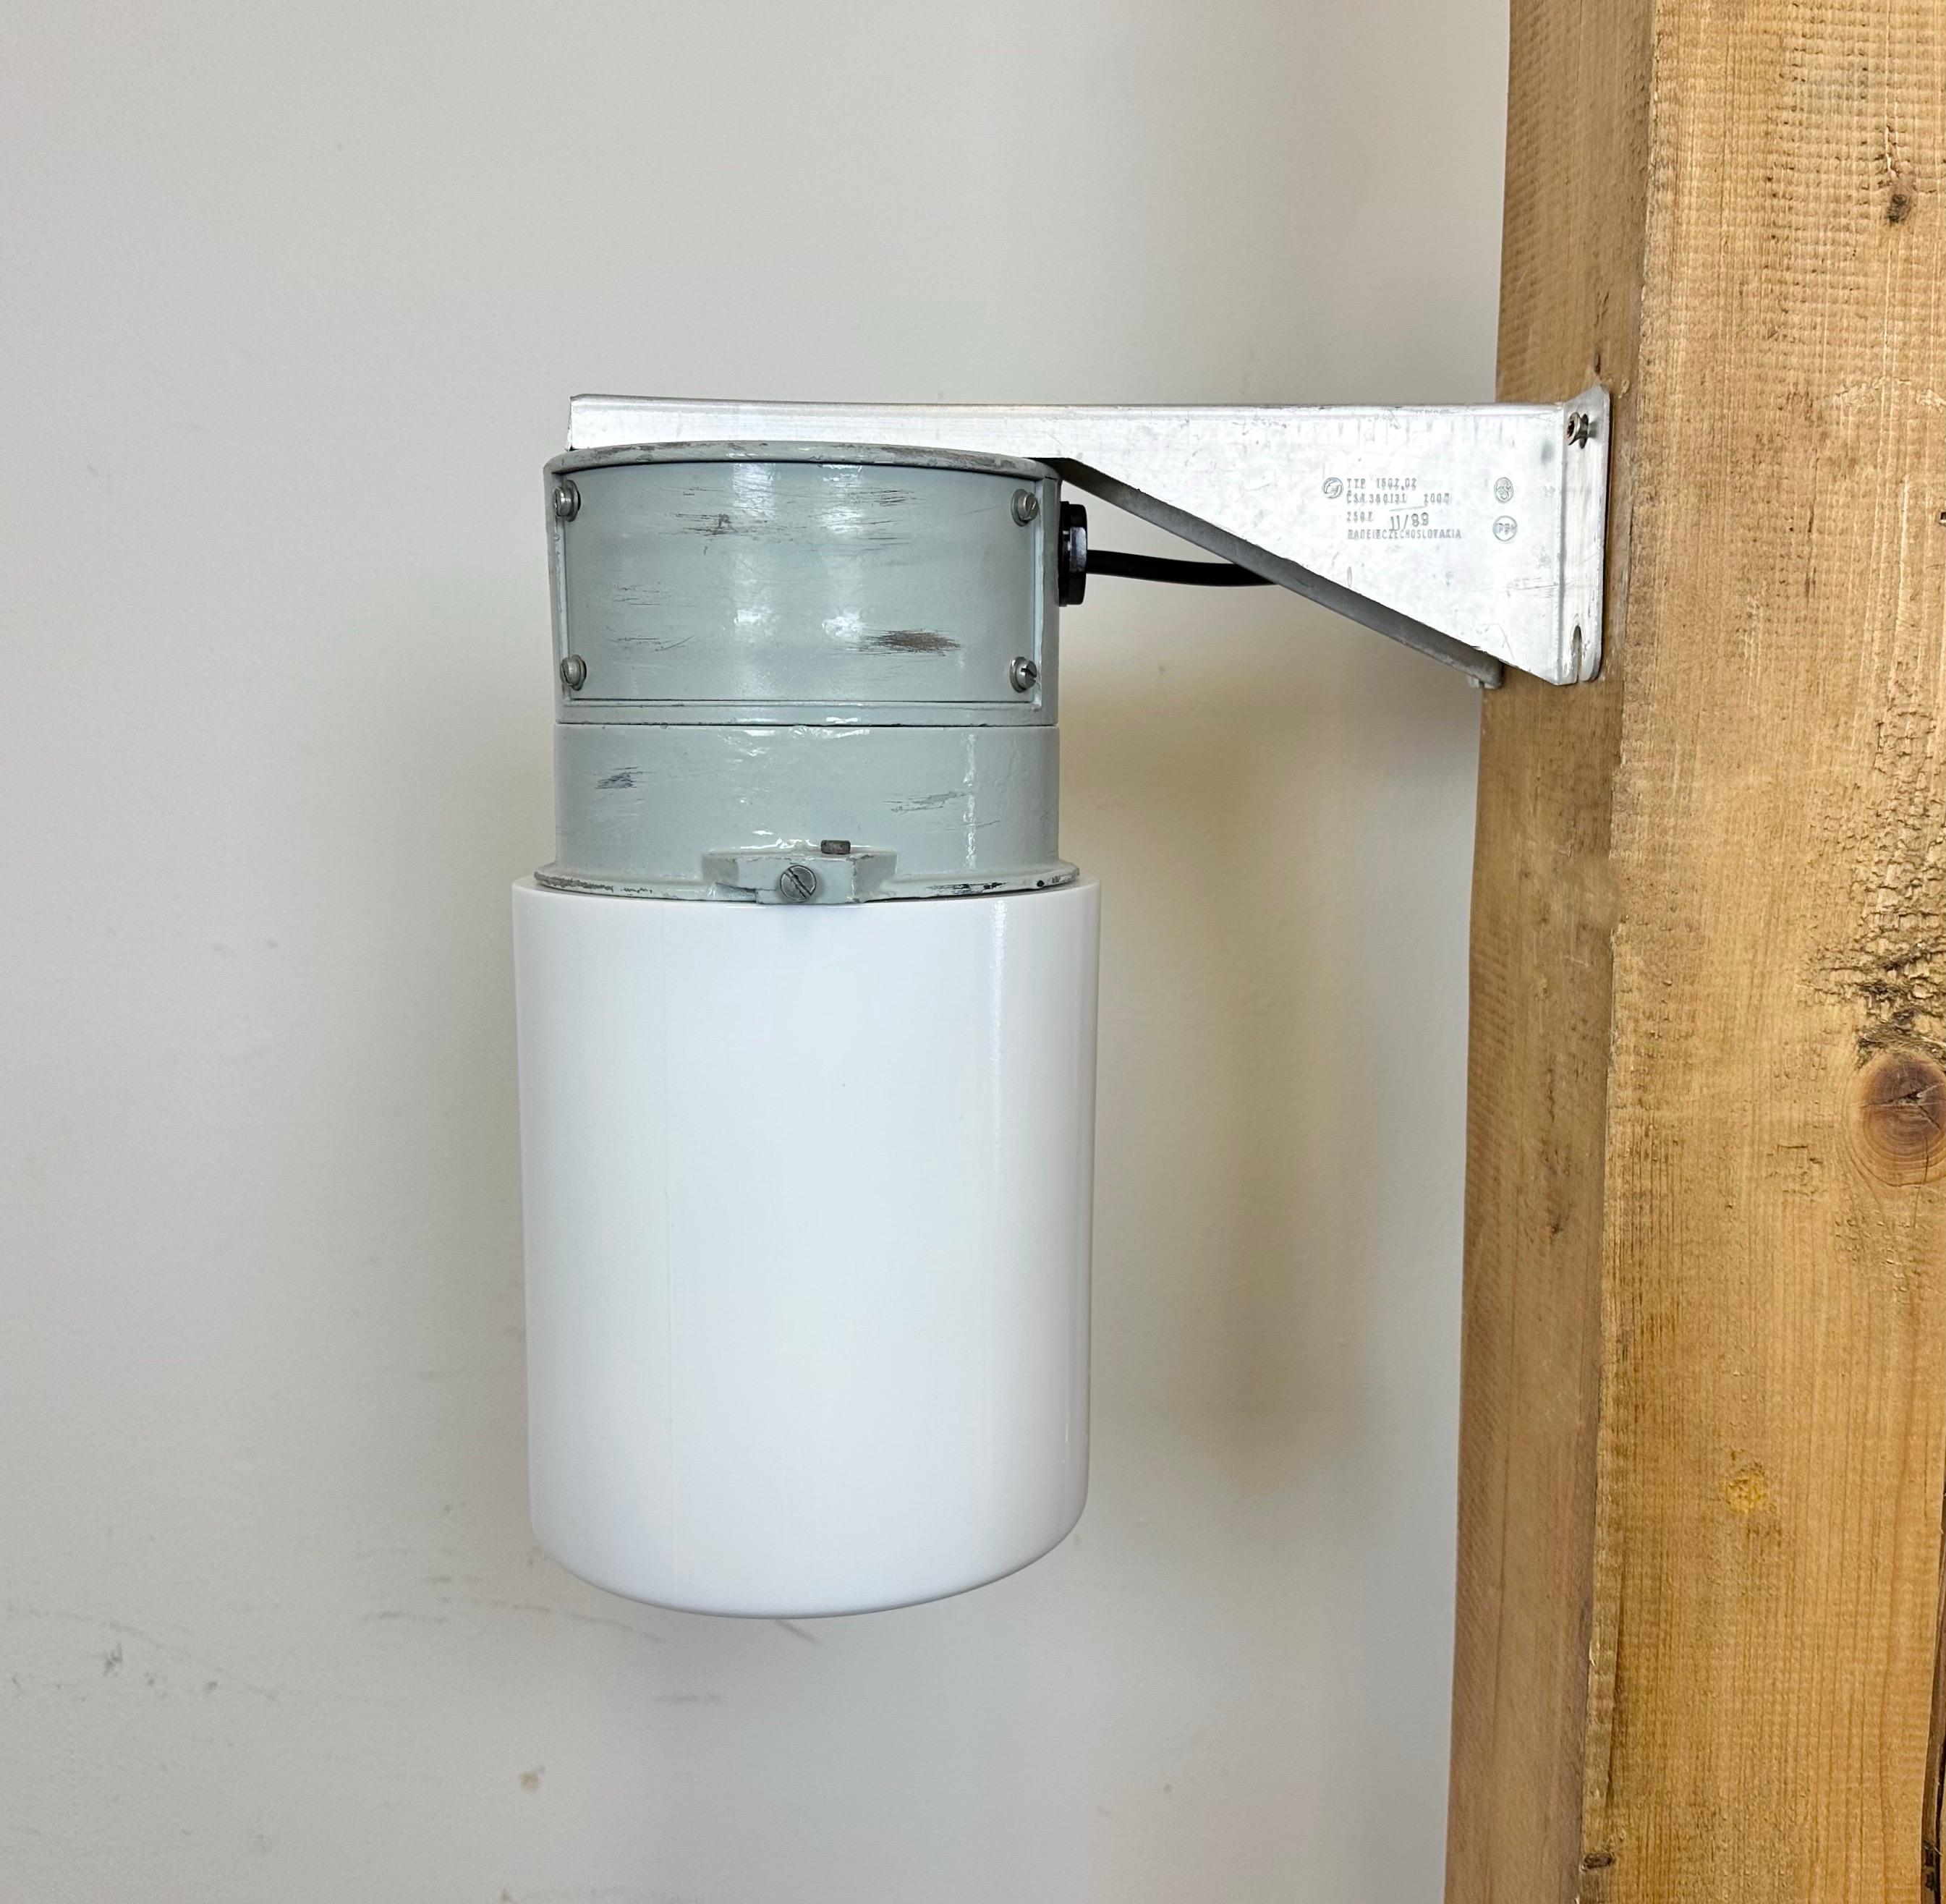 This Industrial wall light was made by Elektrosvit in former Czechoslovakia during the 1970s. It features a cast aluminium wall mounting and a milk glass cover. New porcelain socket requires standard E 27/ E26 light bulbs. New wire. The weight of